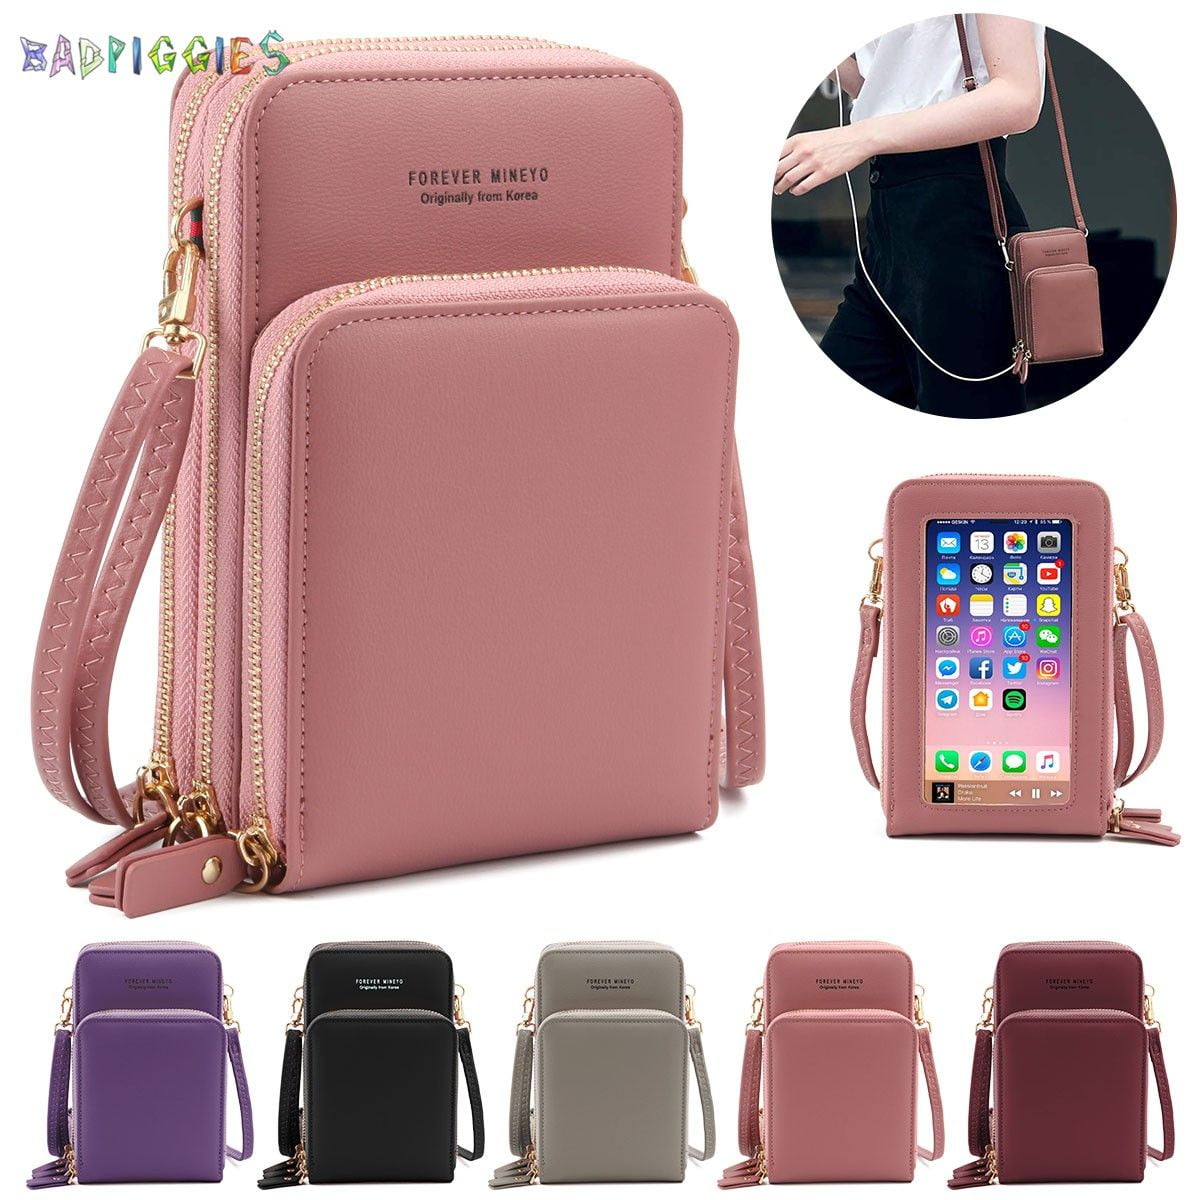 Cell Phone Purse Two Mardi Gras Mask Crossbody Bag Womens Lightweight Portable Small Wallet Waterproof PU Leather Mini Shoulder Bag Easy Care Phone Wallet For Shopping Date Hiking